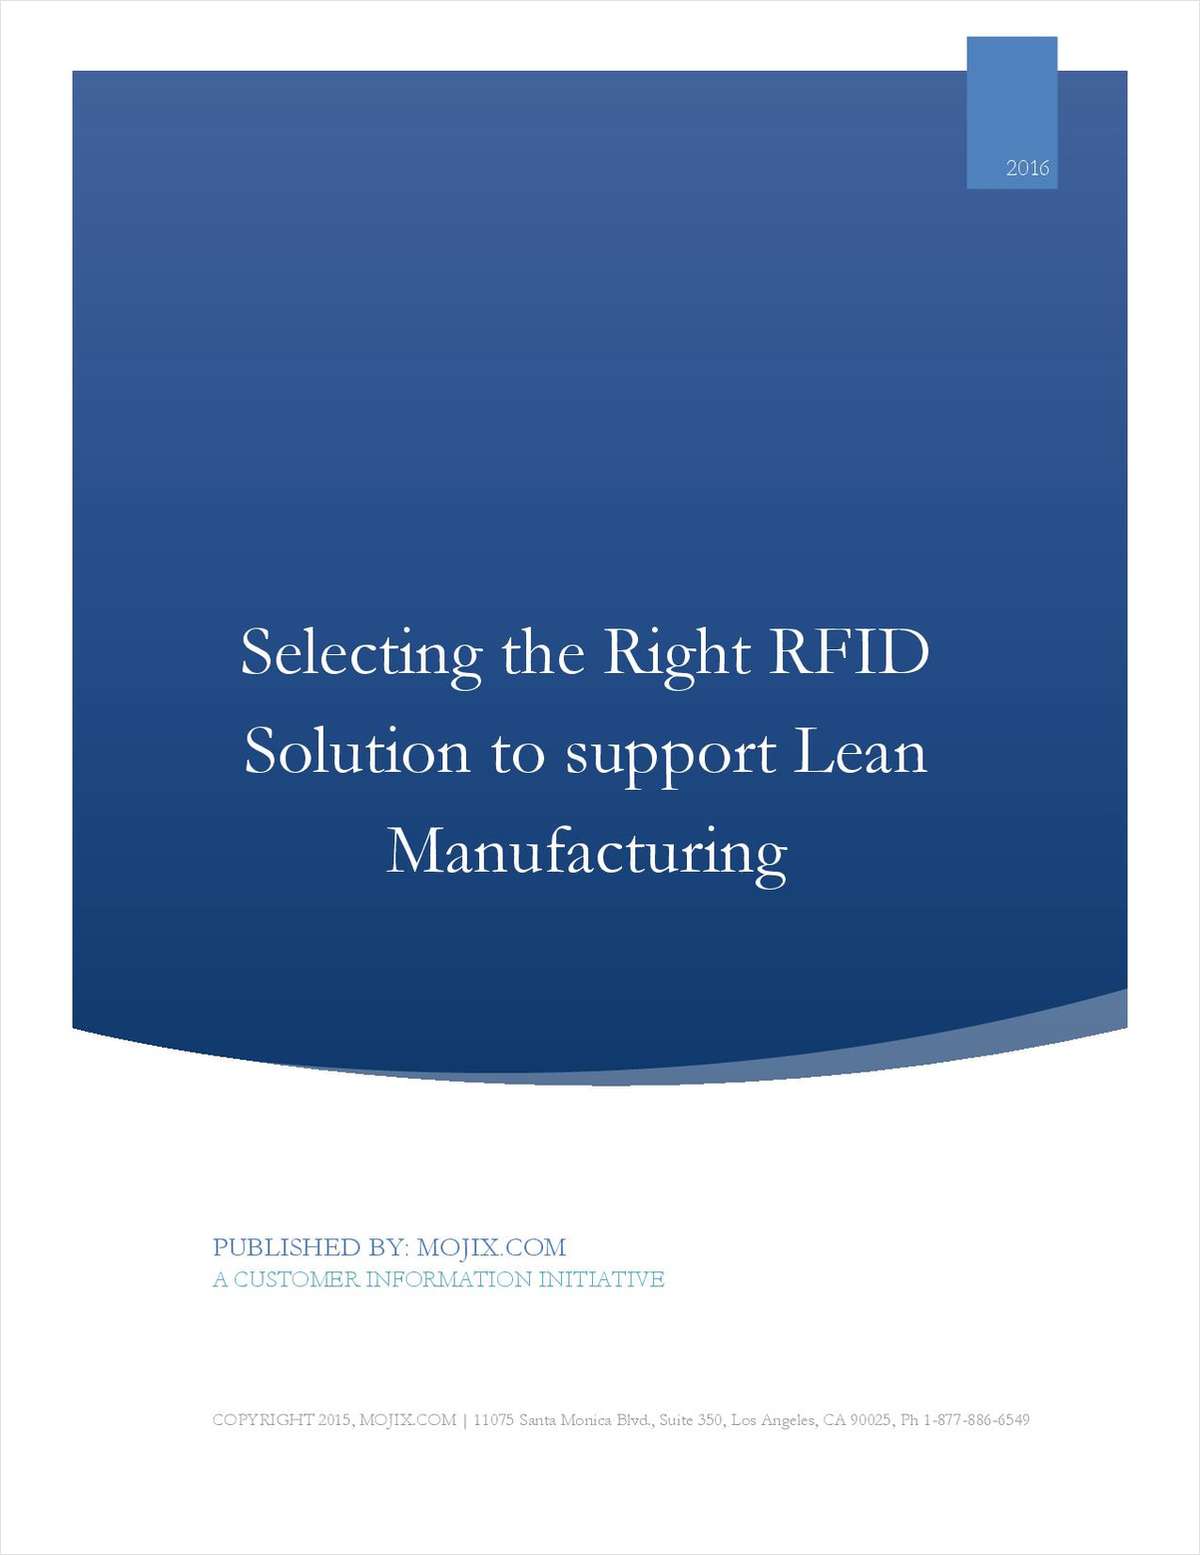 7 Minute Guide: Selecting the right RFID solution to support Lean Manufacturing